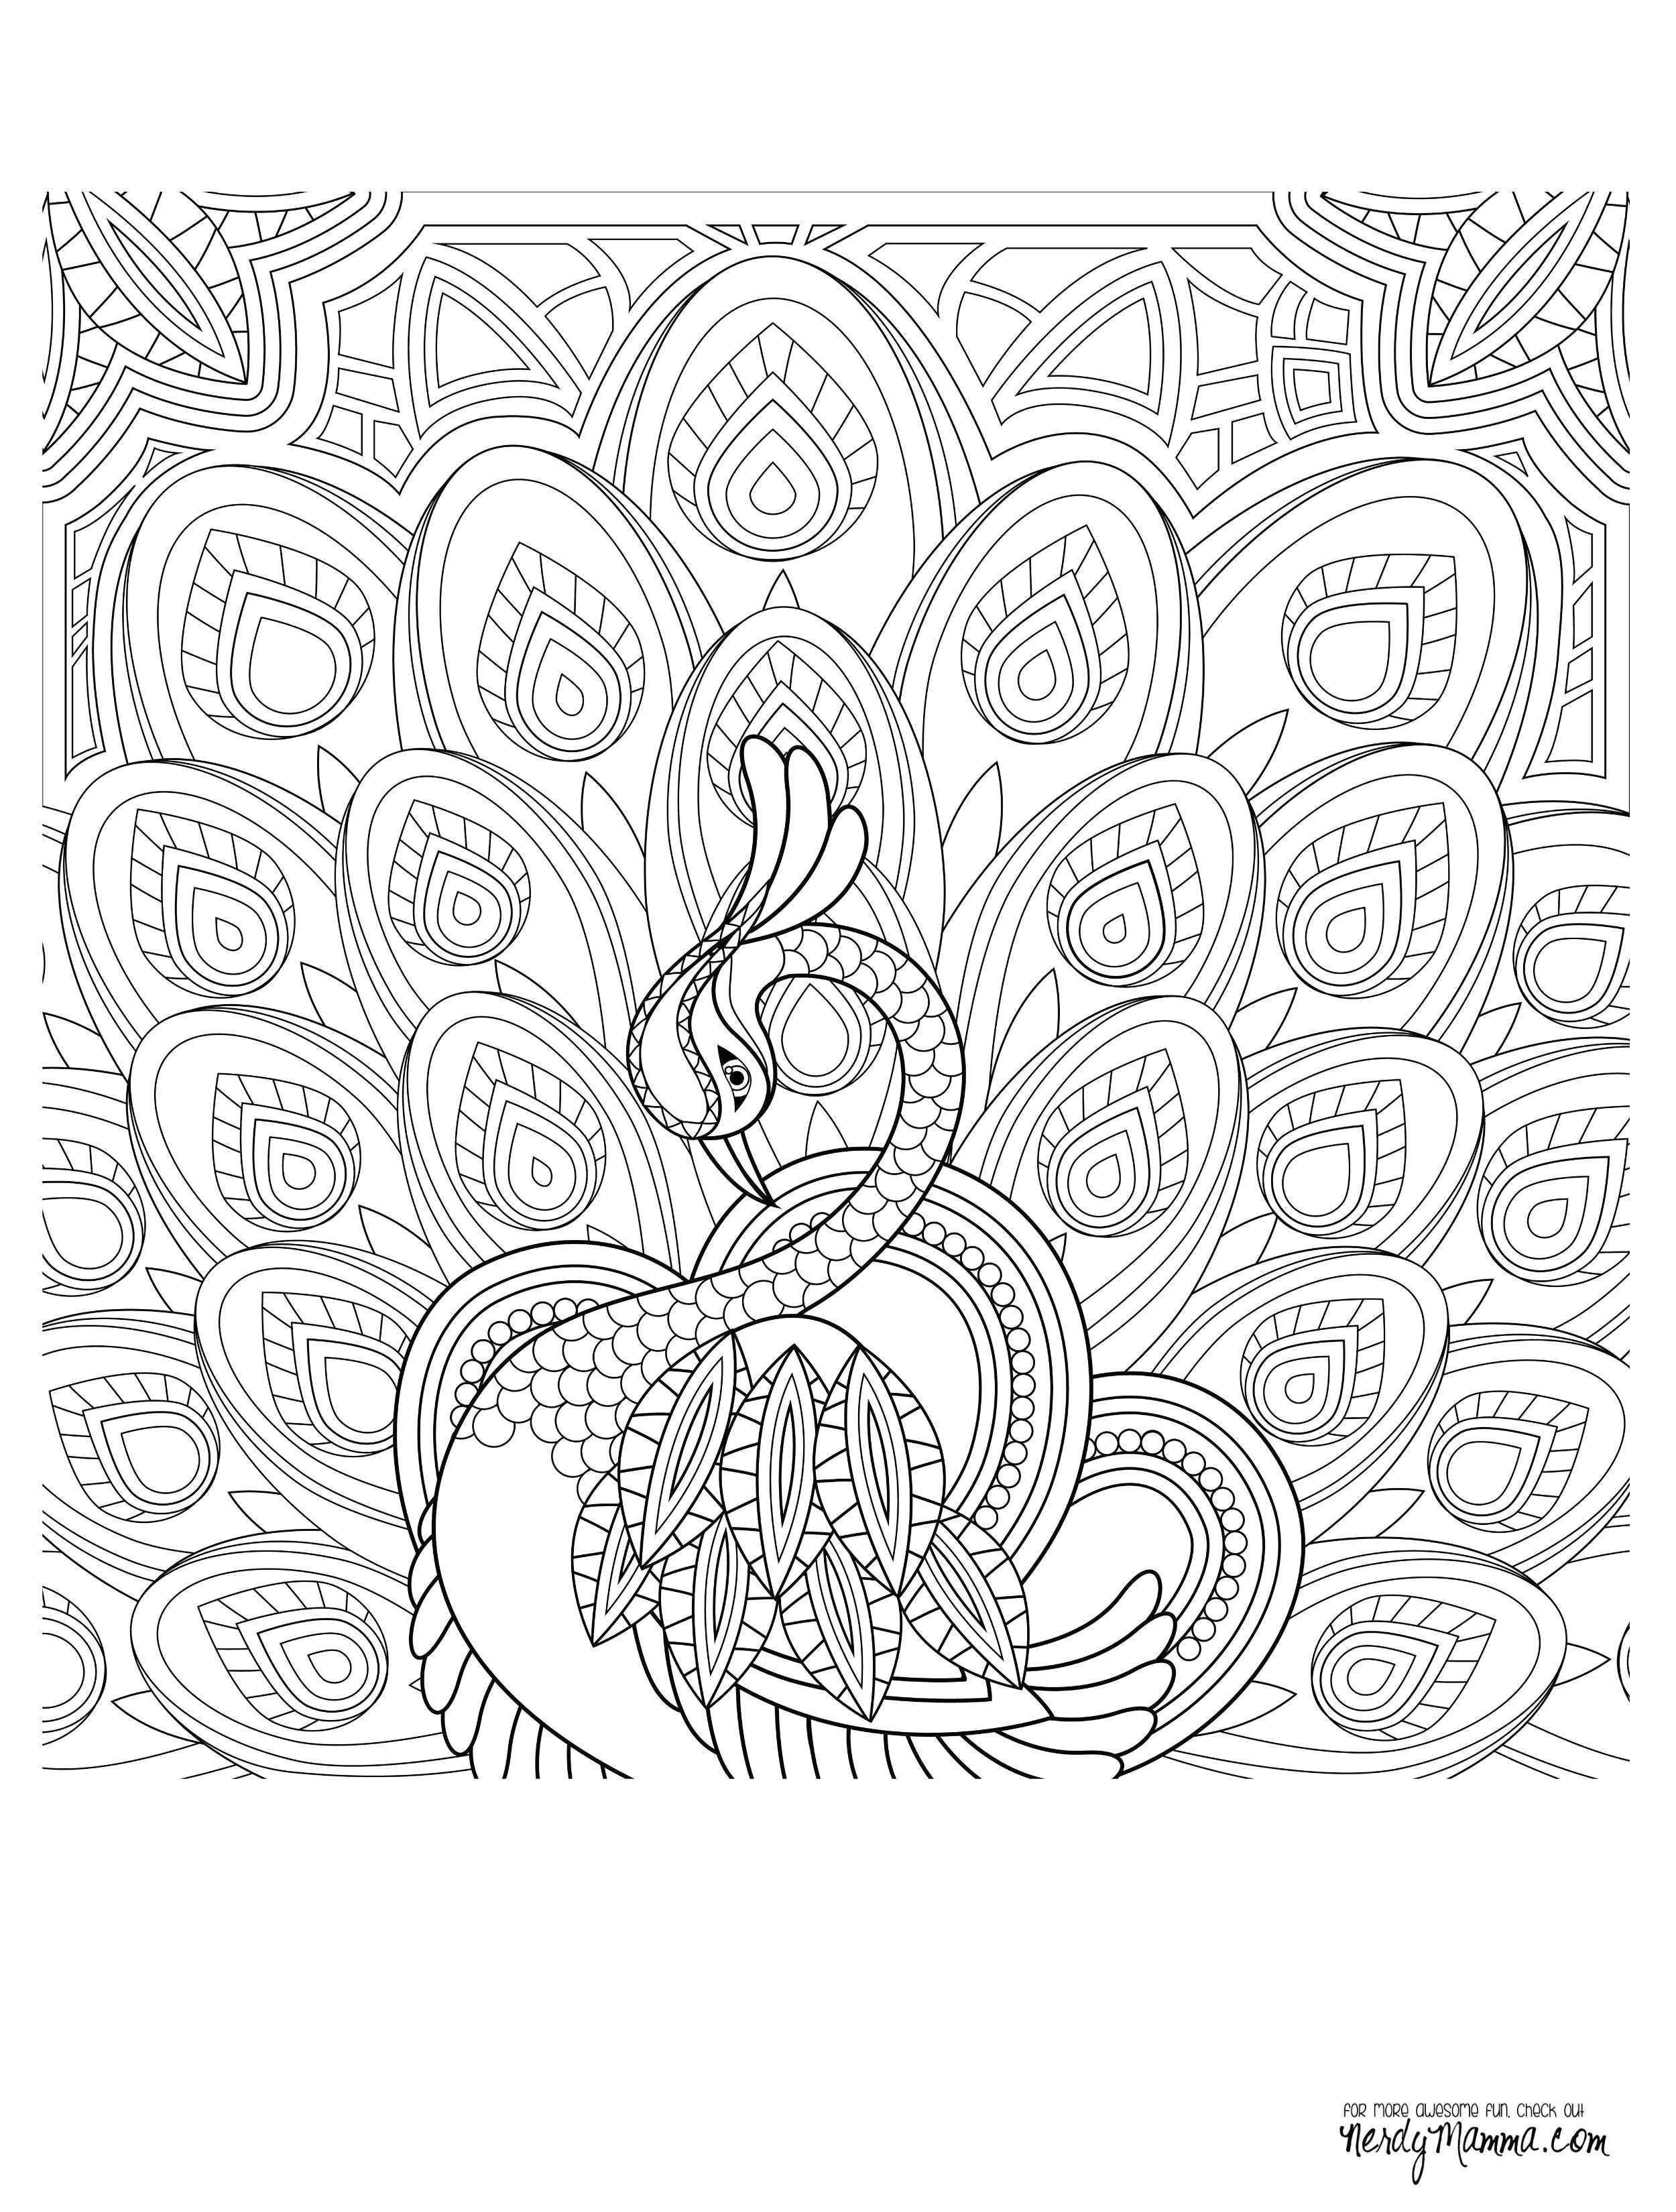 images of coloring pages unique mal coloring pages fresh crayola pages 0d voterapp avaboard